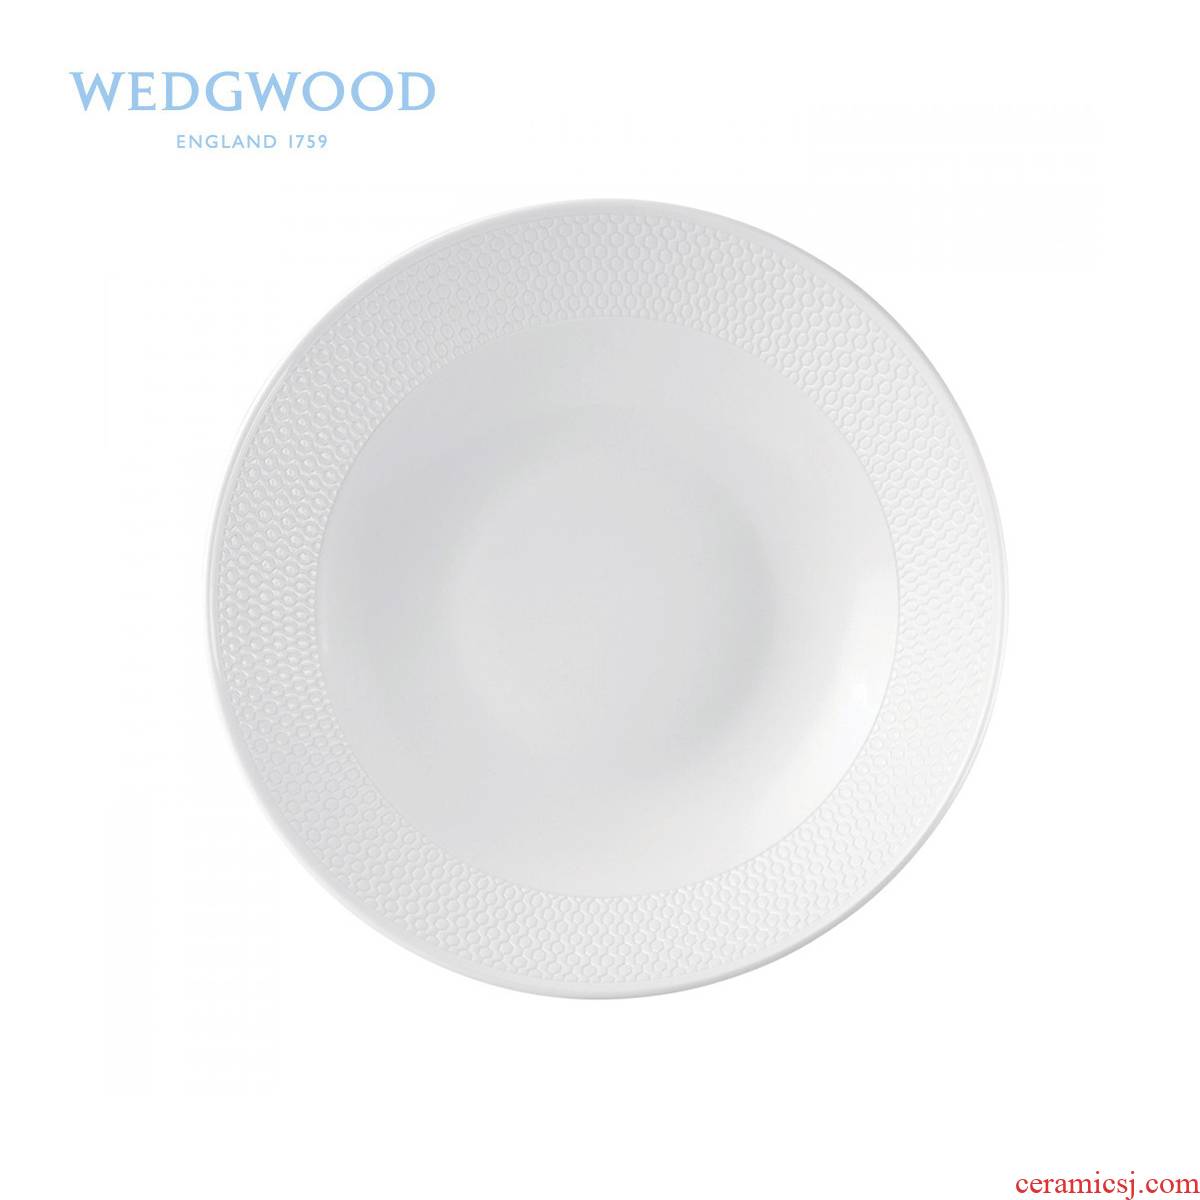 Wedgwood waterford Wedgwood Gio honeycomb series ipads China 20.5 cm deep dish only pure color hot plate